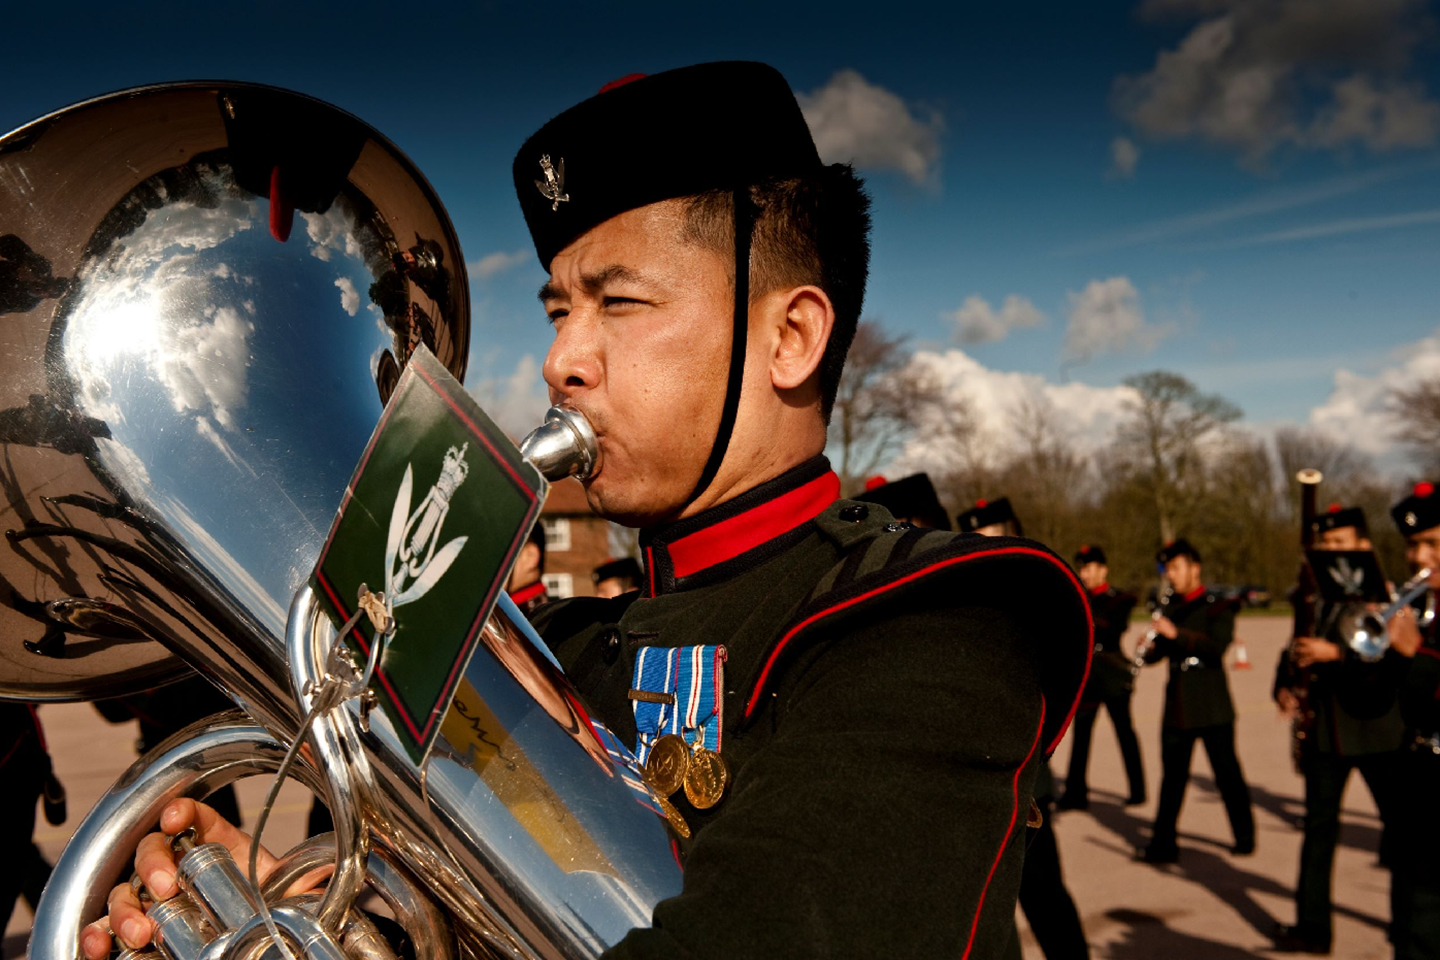 Gurkha soldier performing with a tuba at a ceremony 